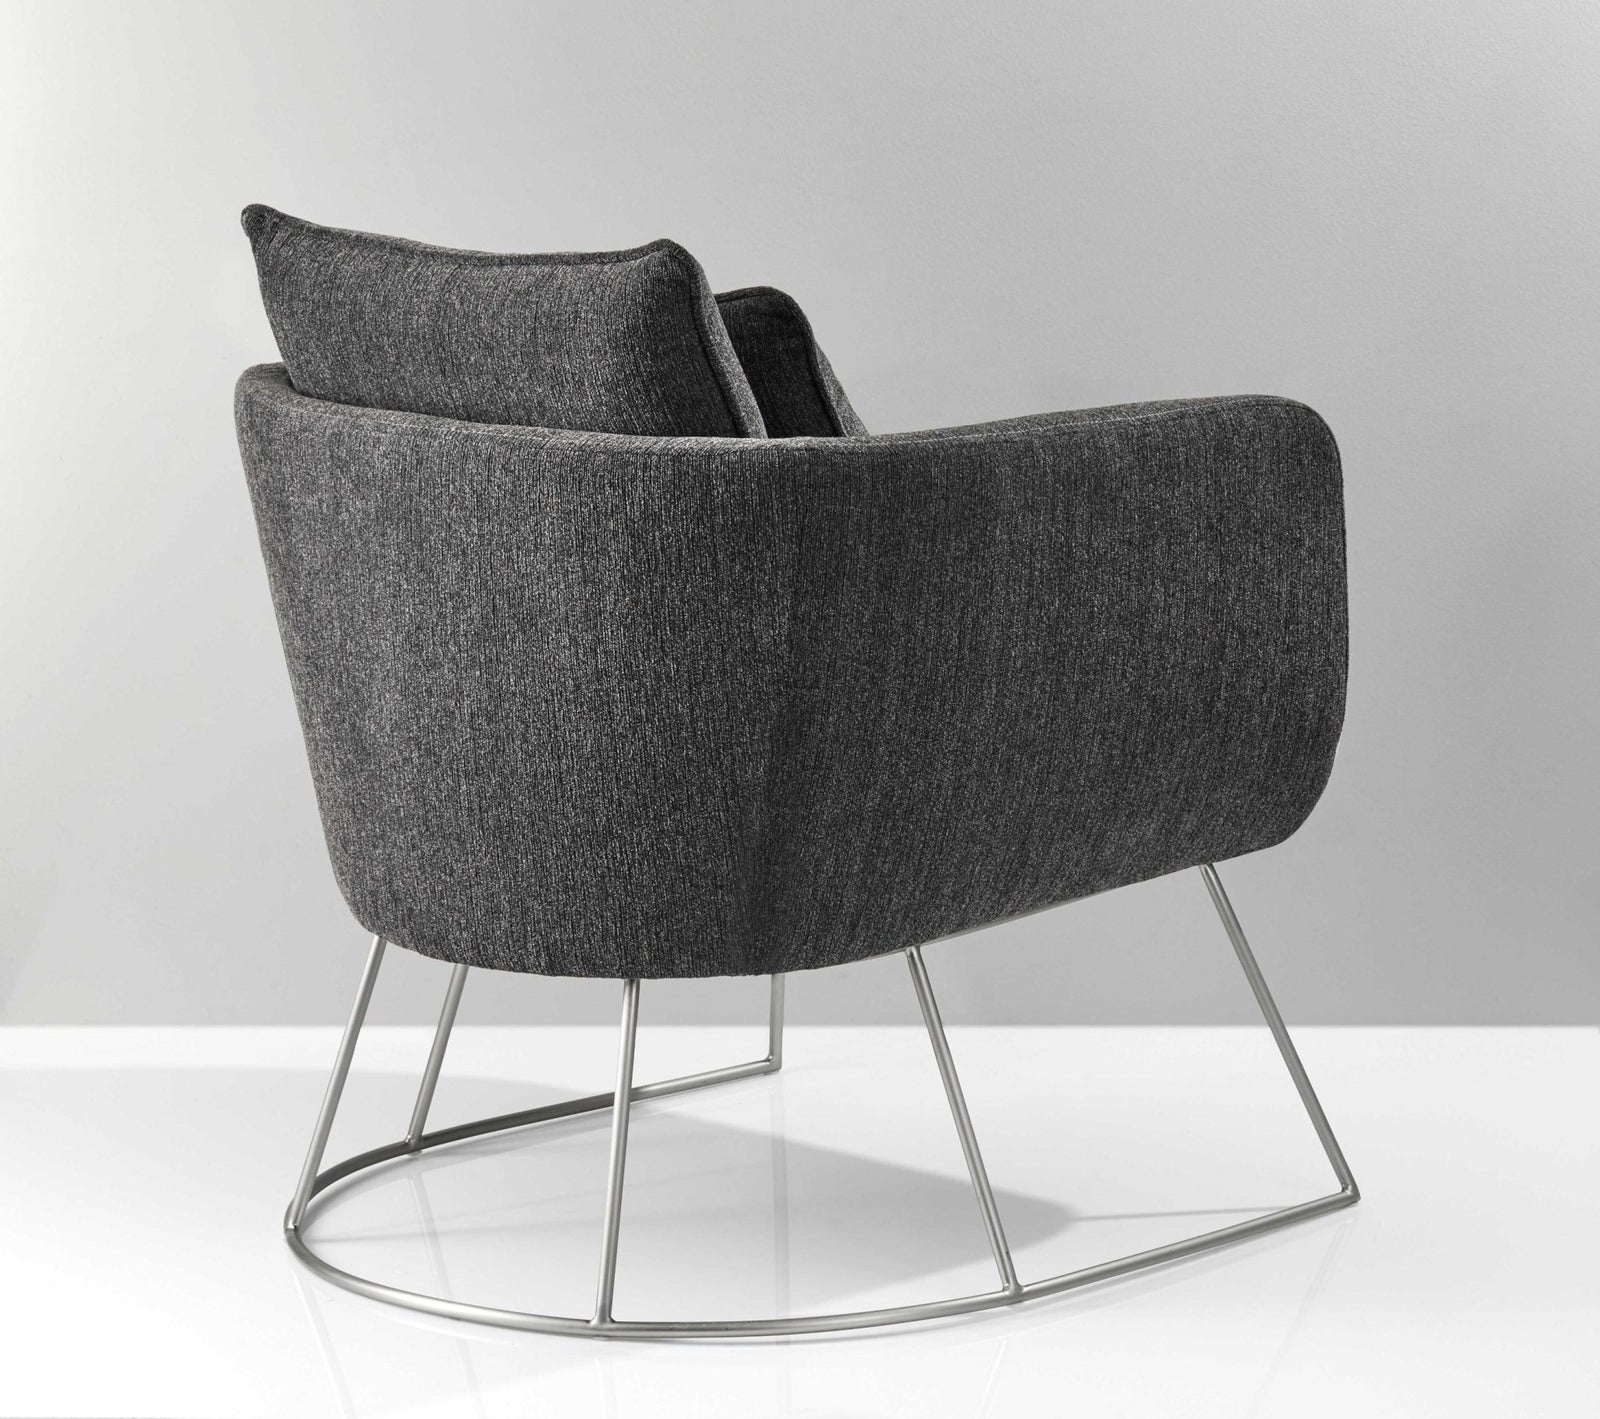 Dark Grey Soft Textured Fabric and Brushed Steel Chair - 29" X 27.5" X 32.5"